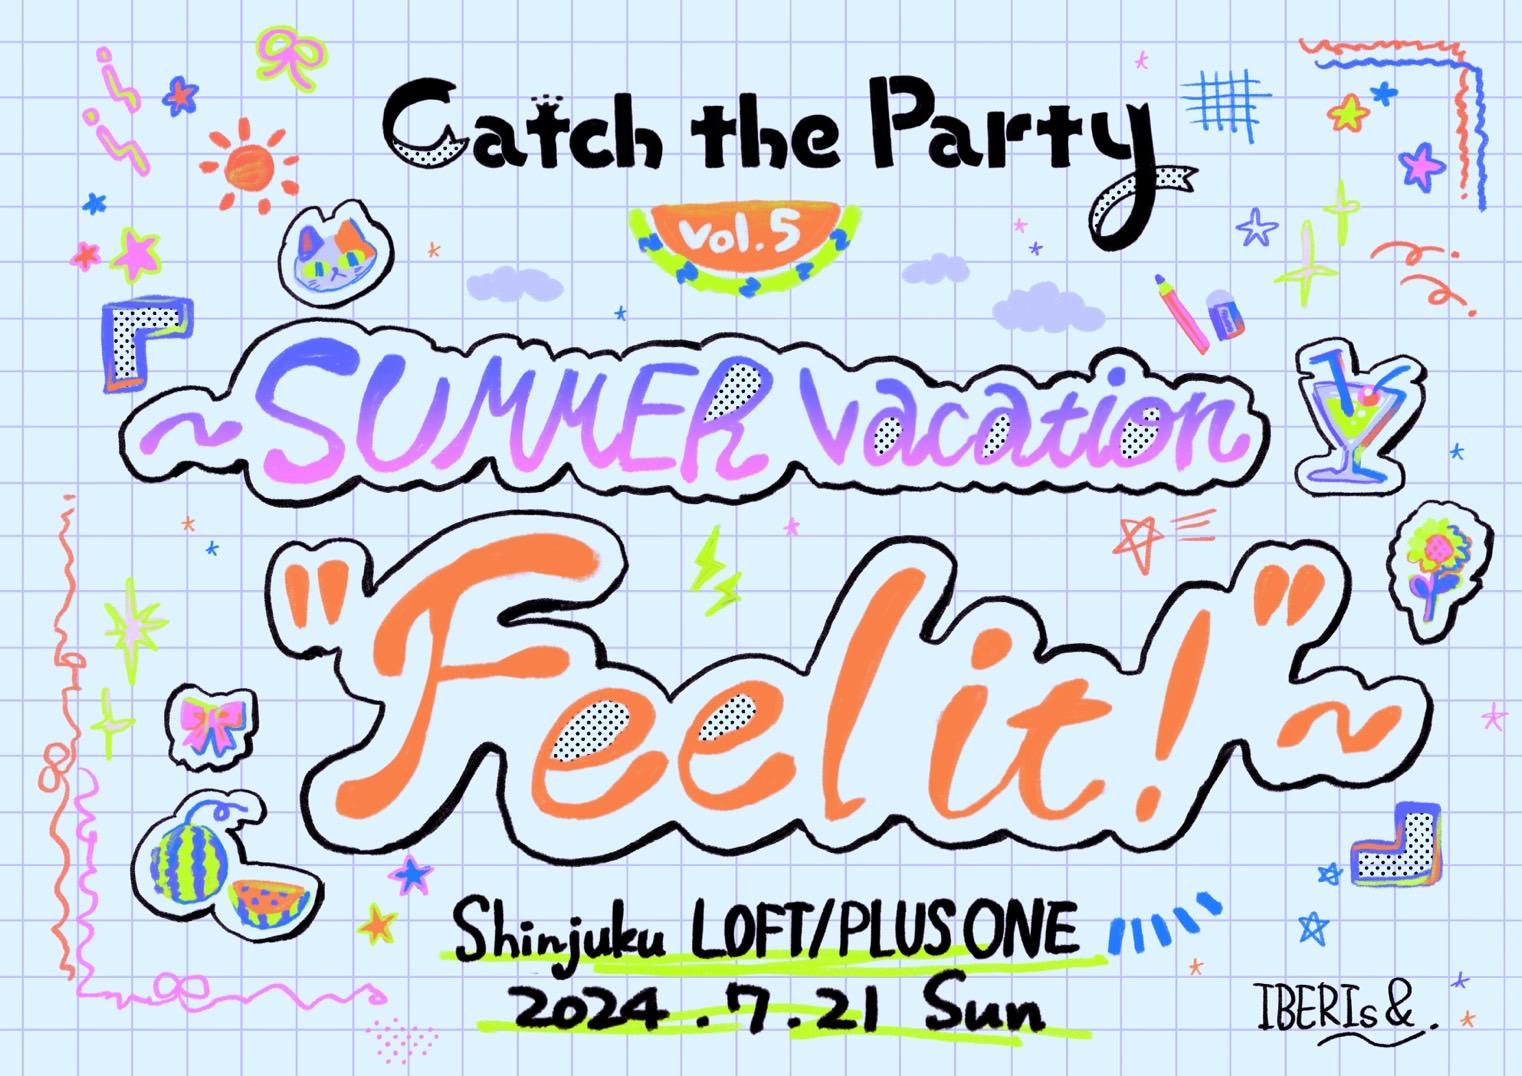 Catch the Party vol.5 〜SUMMER vacation “Feel it!”〜開催決定！